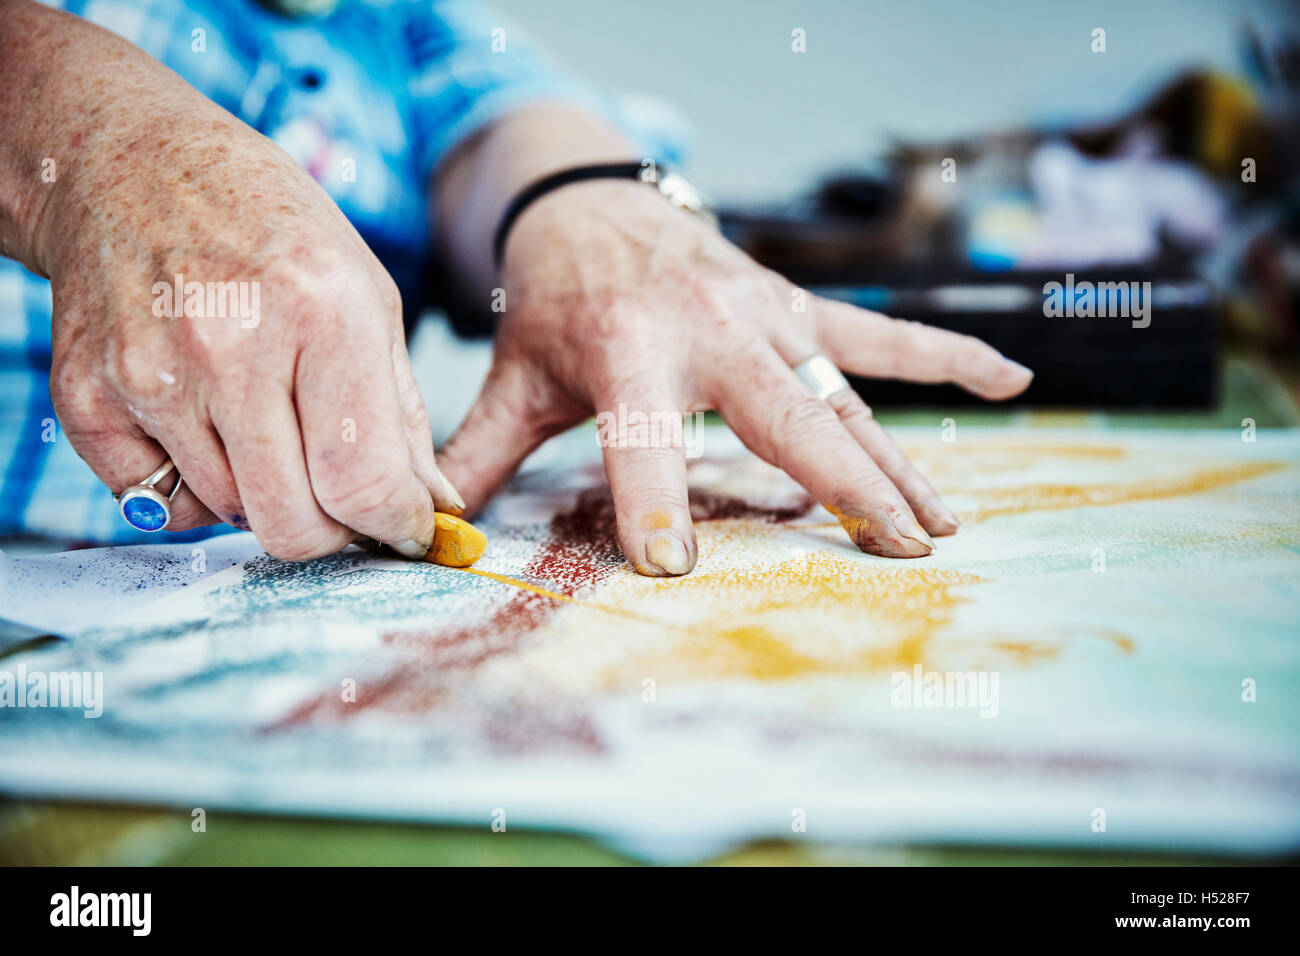 An artist working, hands drawing on the surface of a canvas with a yellow pastel colour. Stock Photo